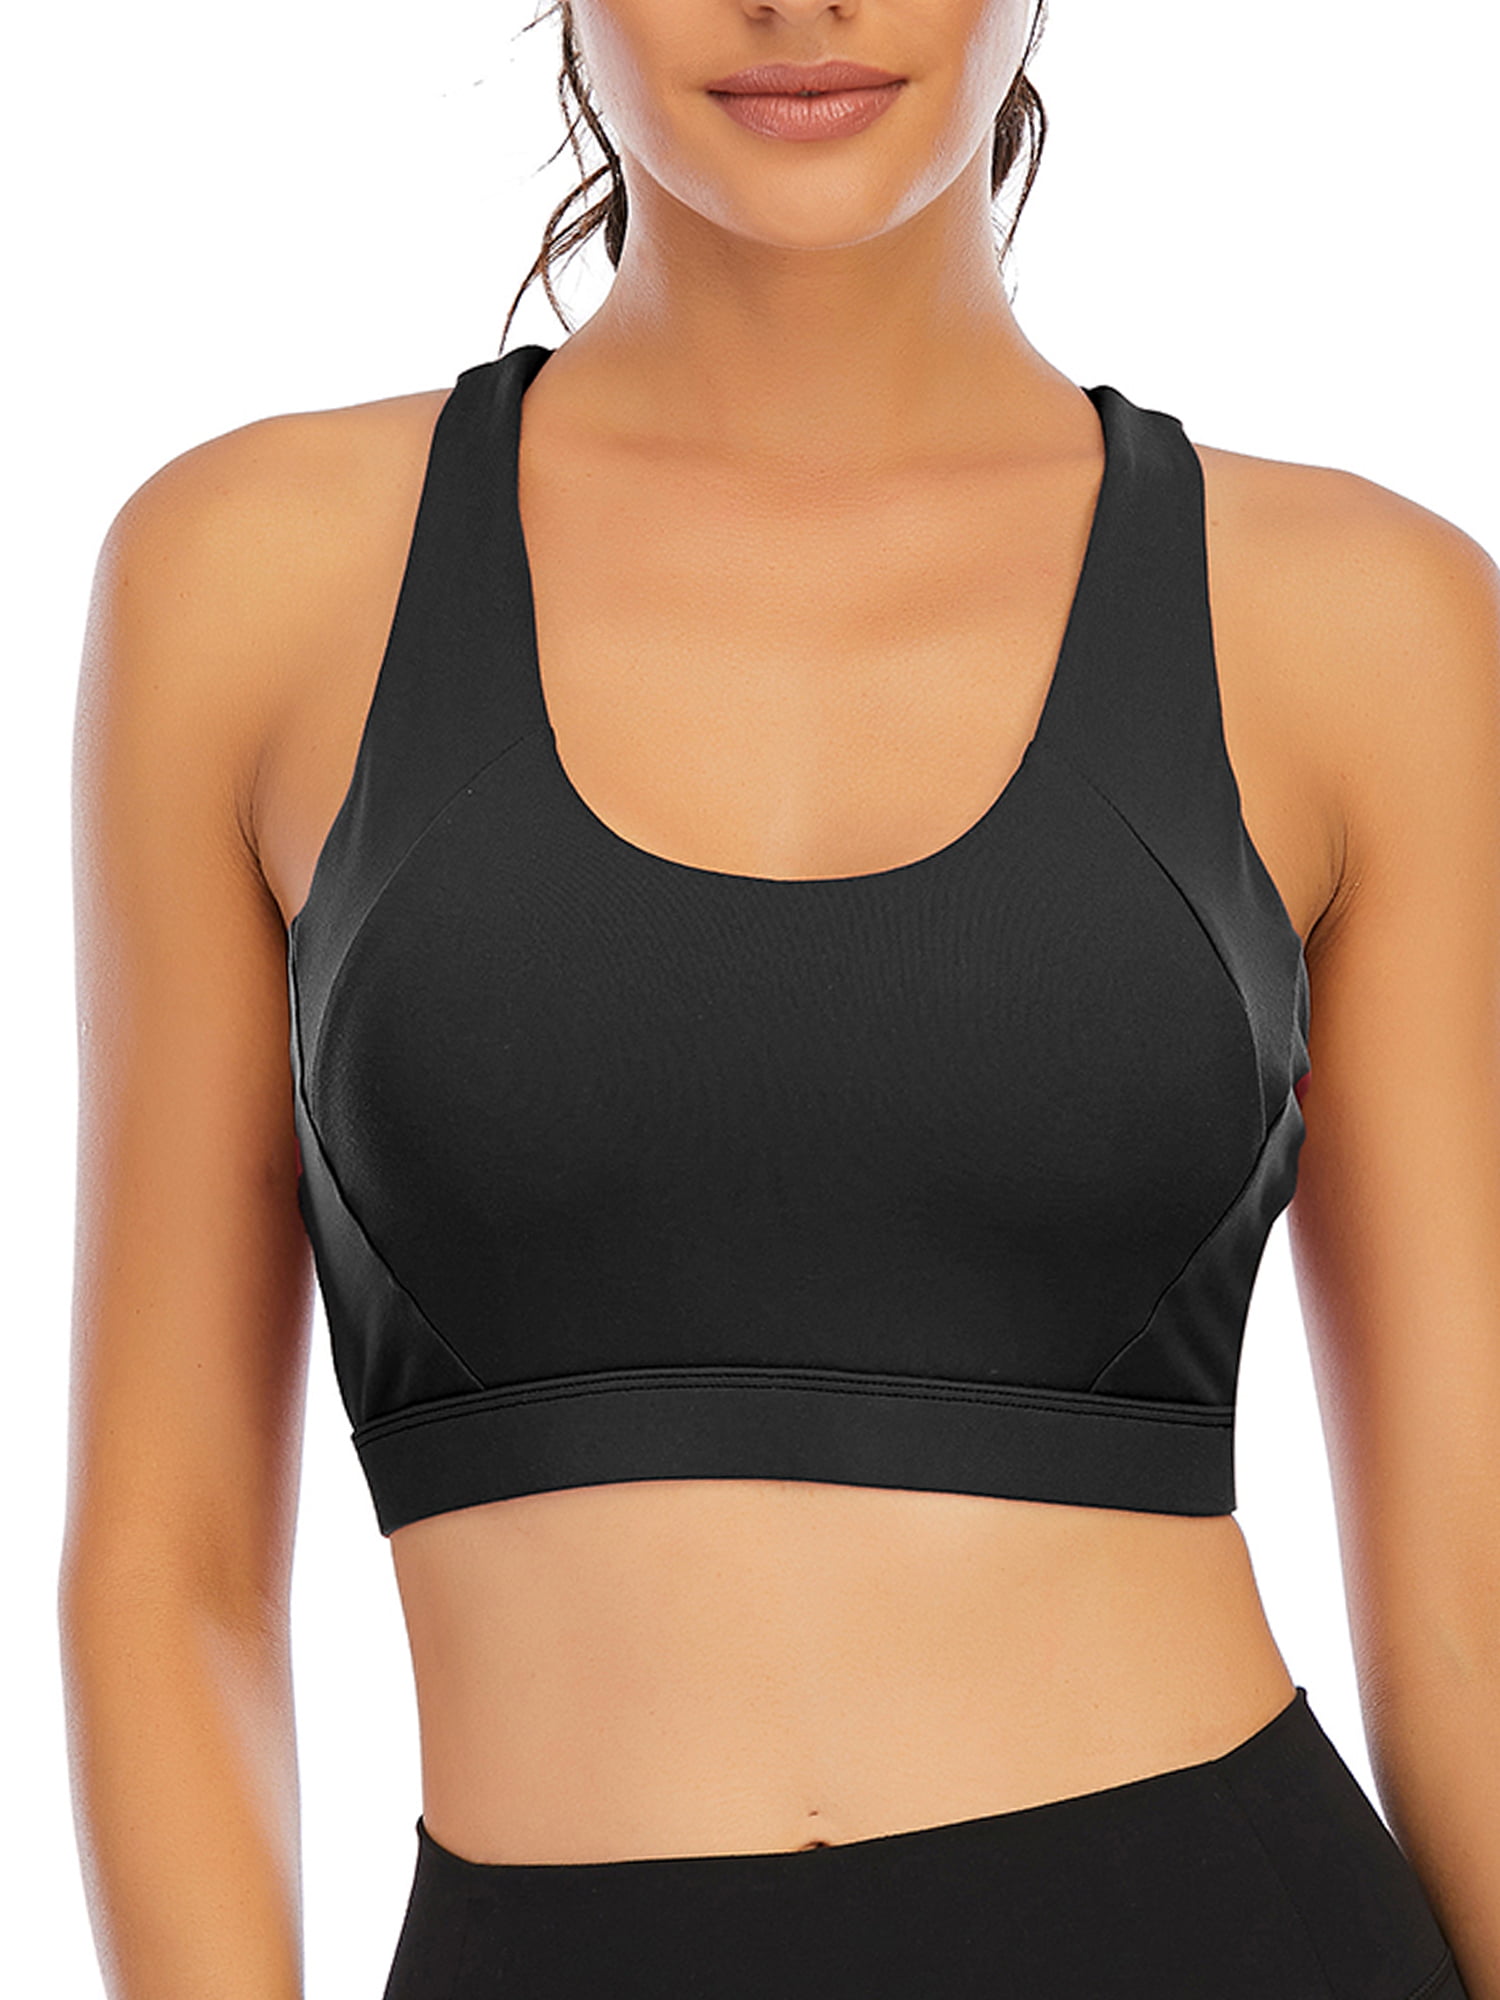 FANNYC Women's Crisscross Sports Hollow Bras Crop Tops for Women Seamless  Wirefree Comfortable Padded Cute Sports Bra Middle Impact Workout Crop Tops  With Removeable Pads 